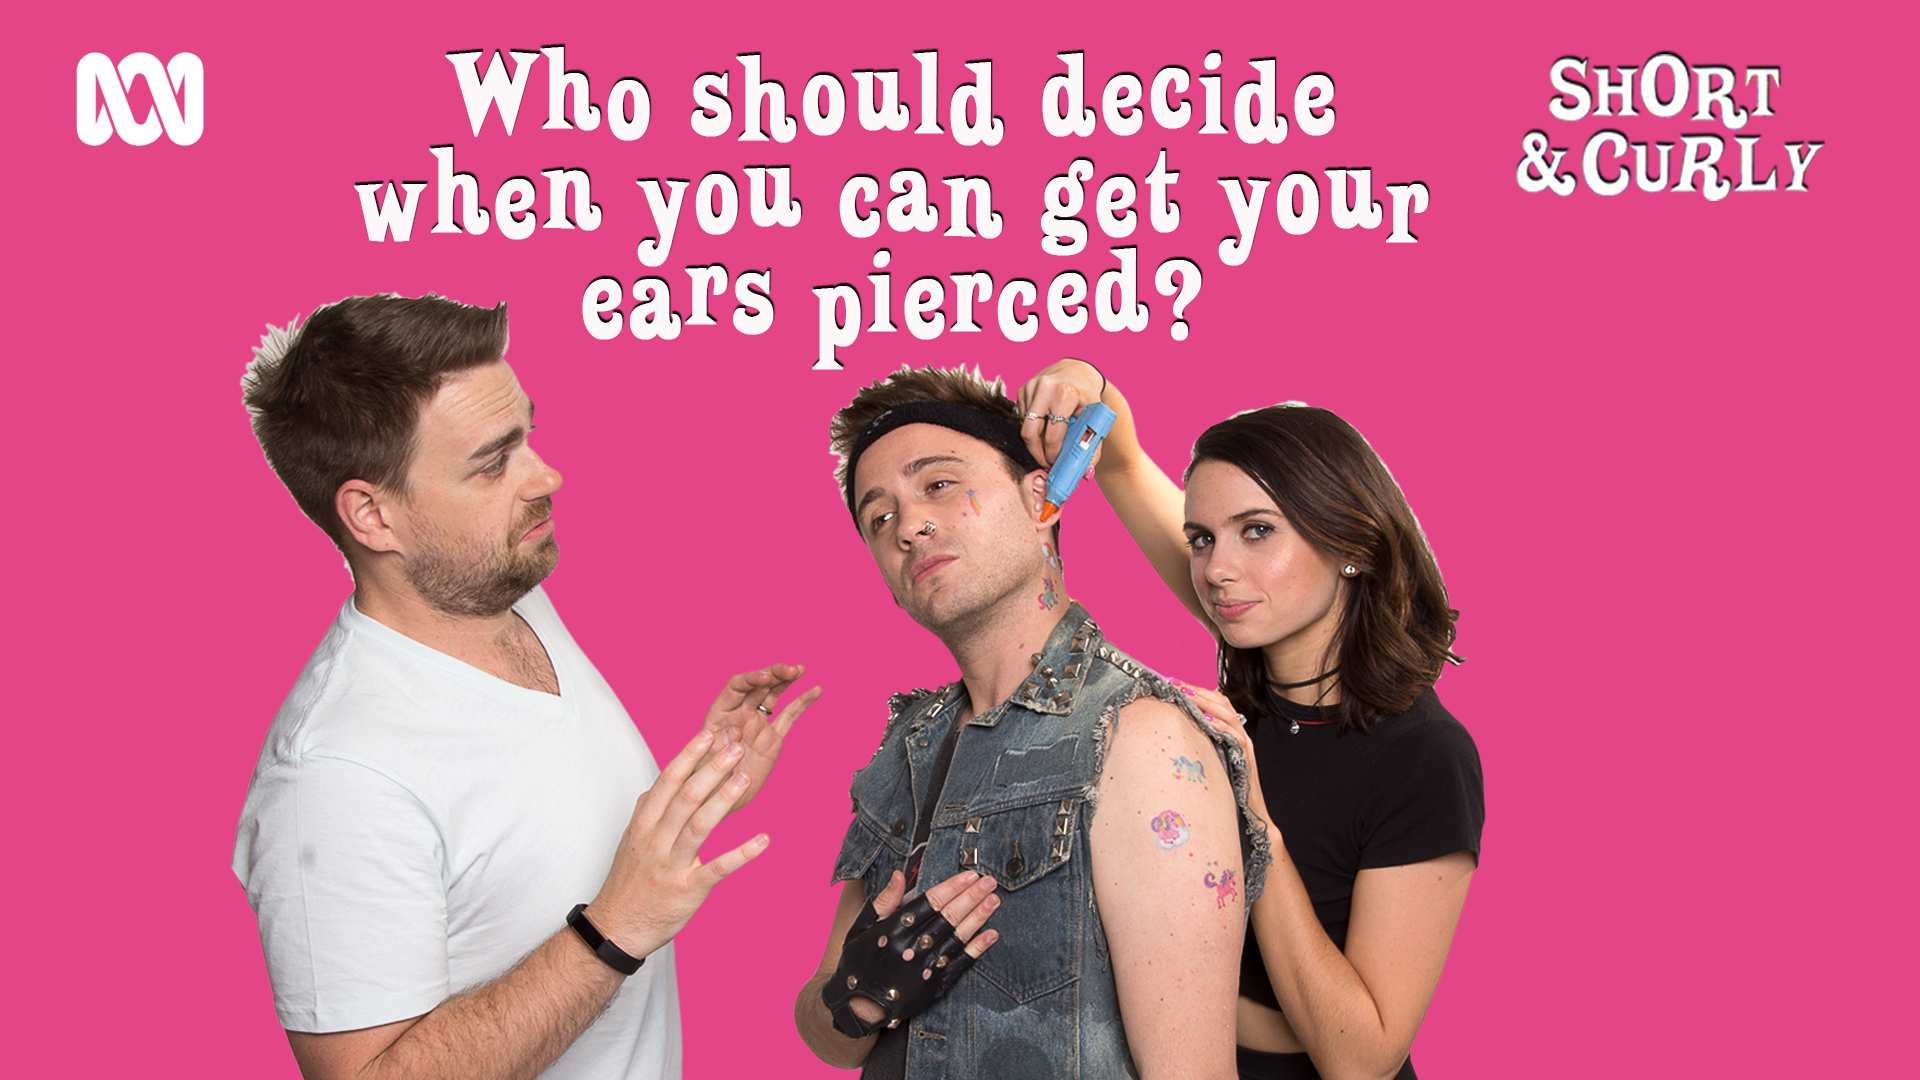 Who should decide when you can get your ears pierced?